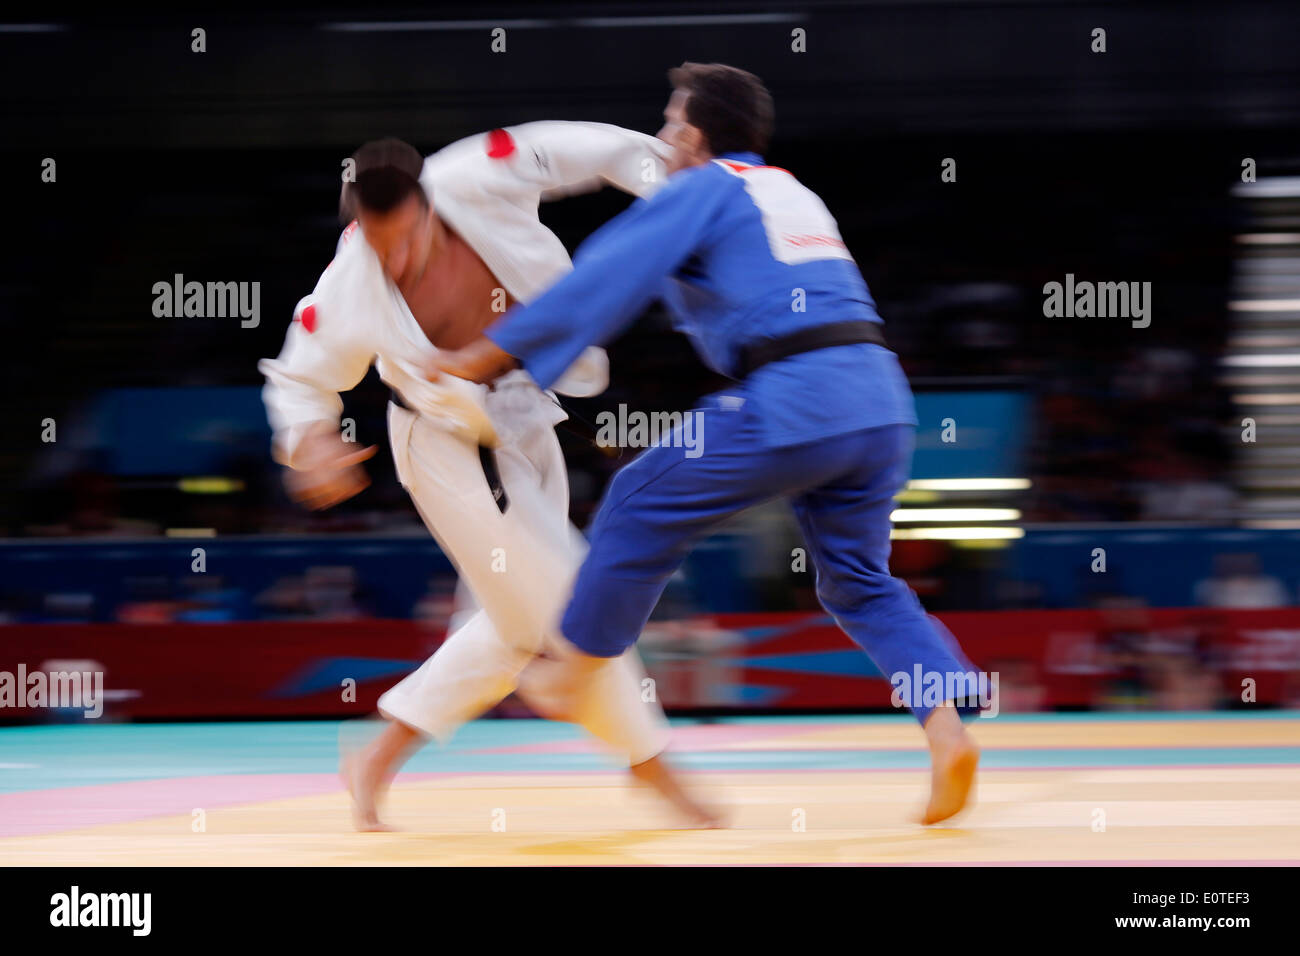 Anatoly Shevchenko of Russia (white) fights against Amir Seyed Nattajsolhdar Mirhassan of Iran (blue) during the men's final of repechage -81kg London 2012 Paralympic Games Judo competition in London, Britain, 31 August 2012. Stock Photo